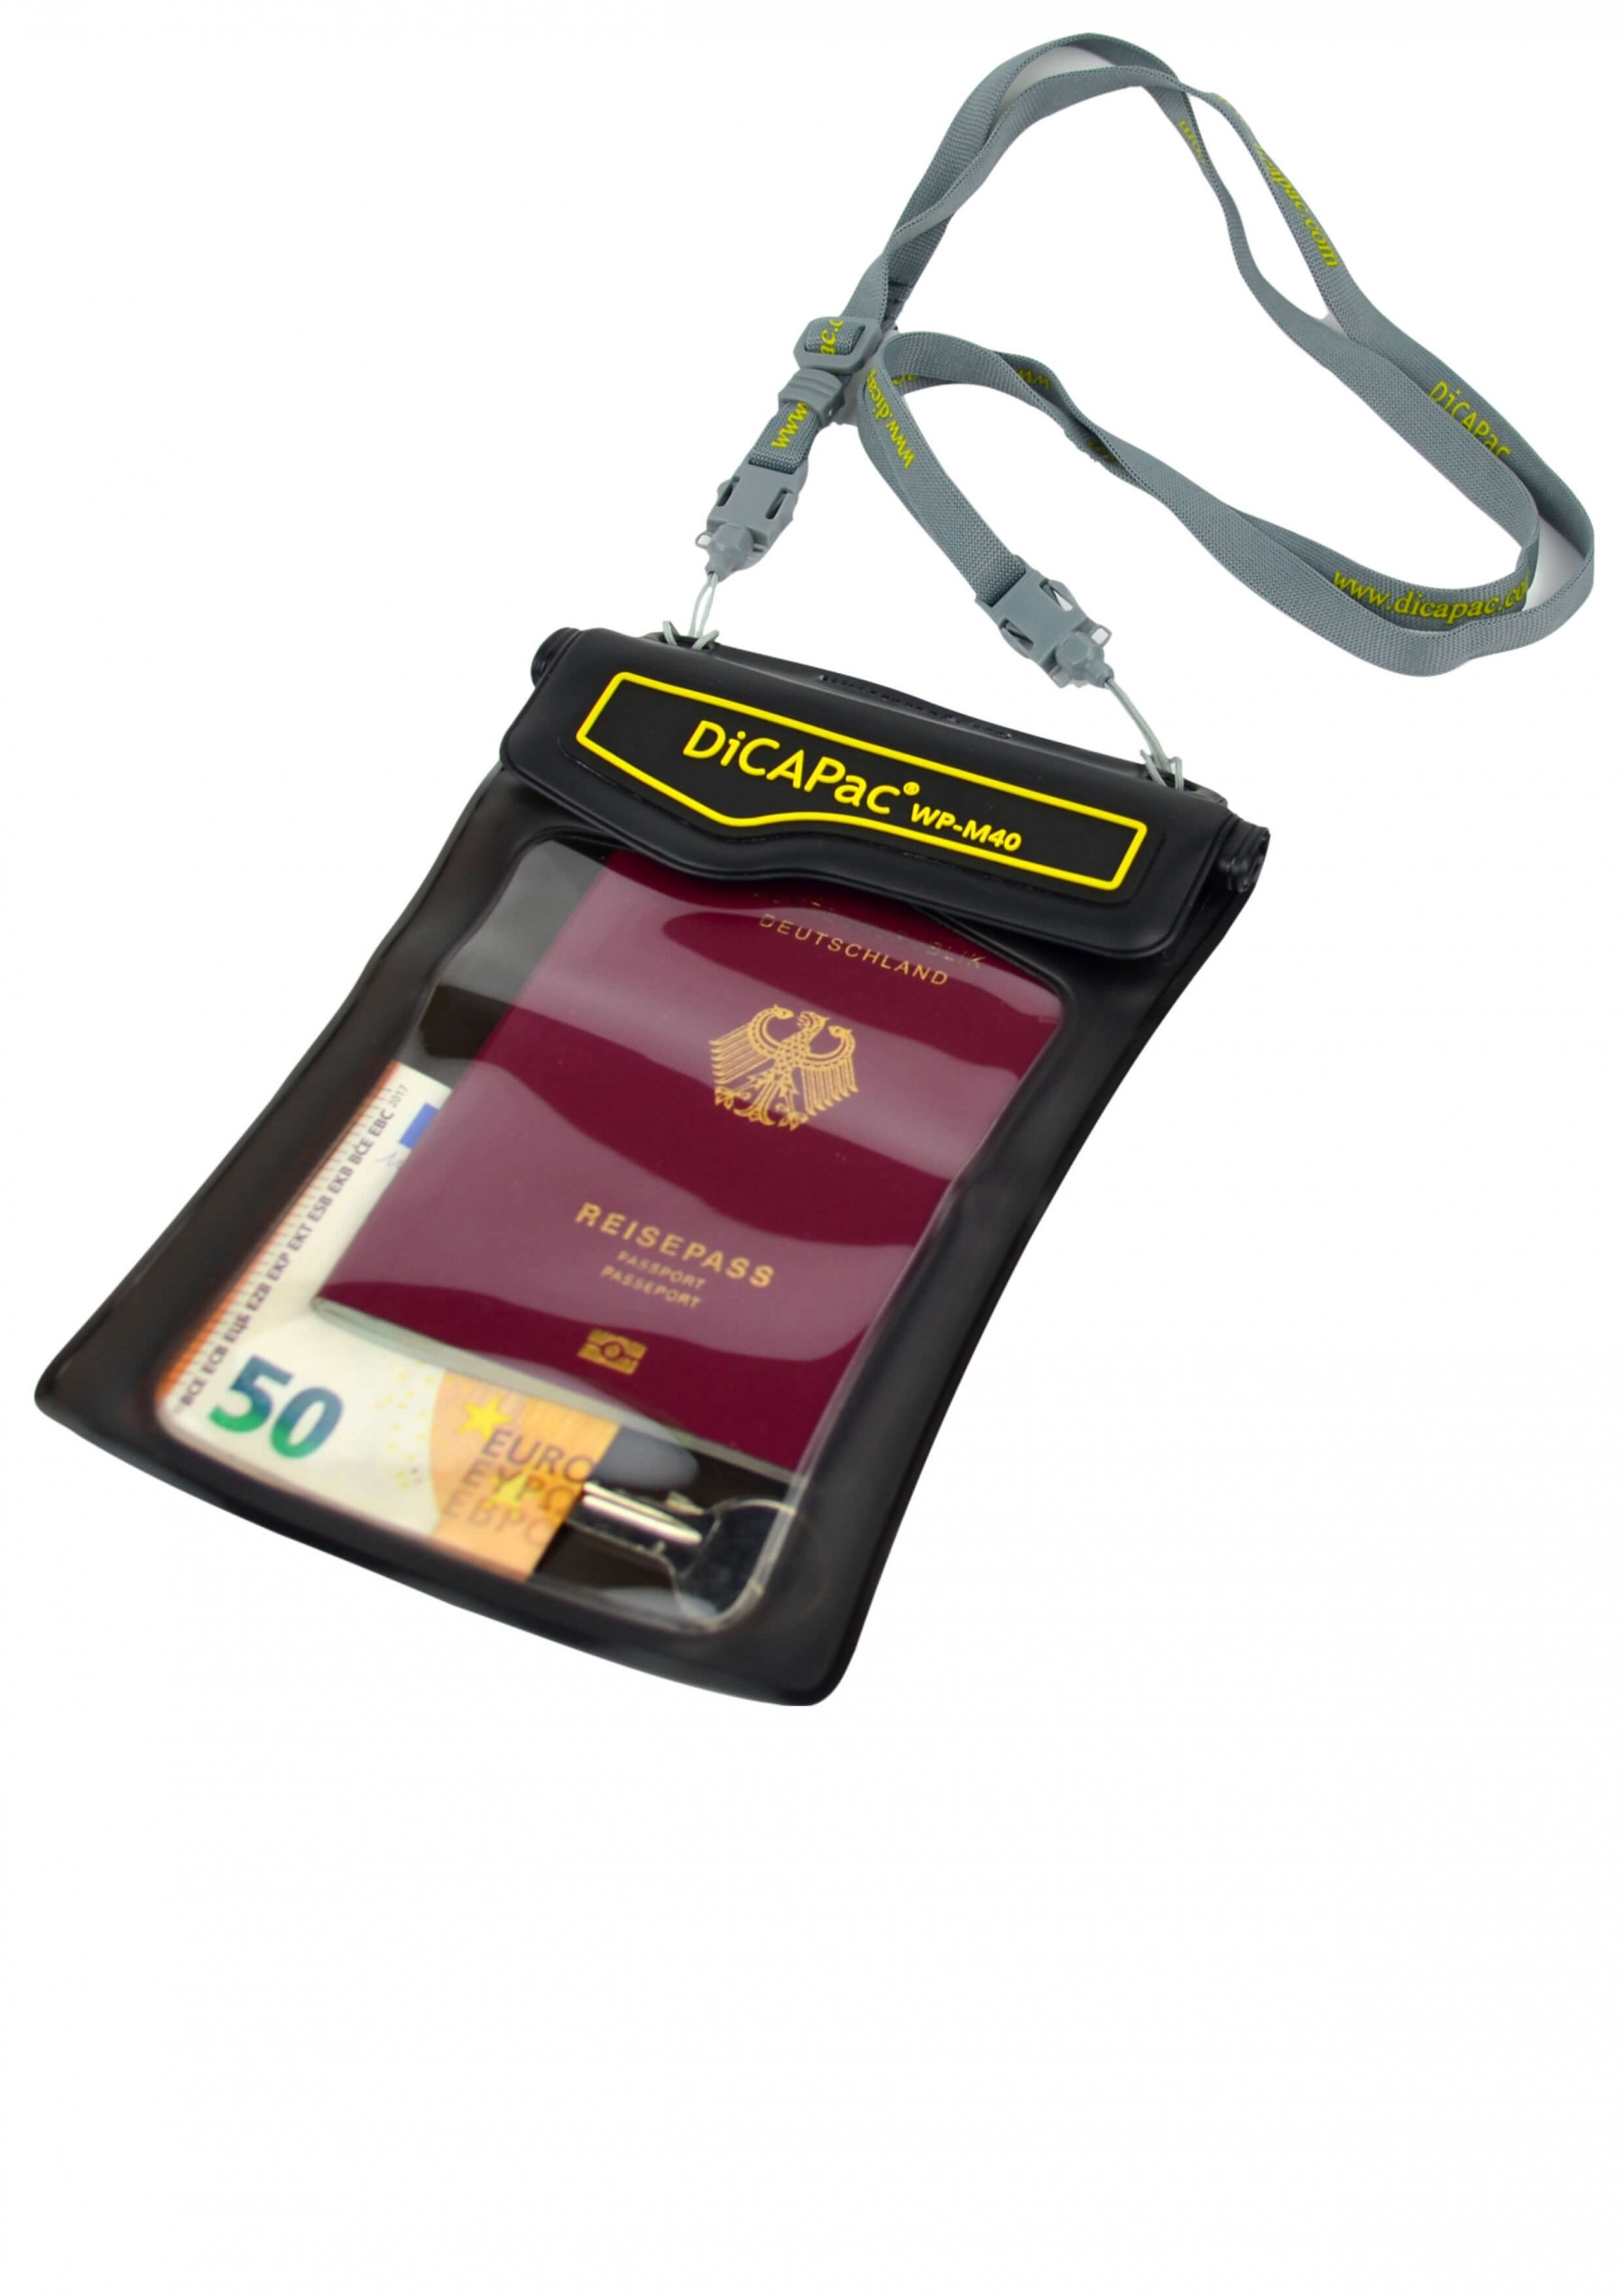  dicapac-wp-m40-waterproof-document-holder-for-up-to-16ft-5m-water-depth-31